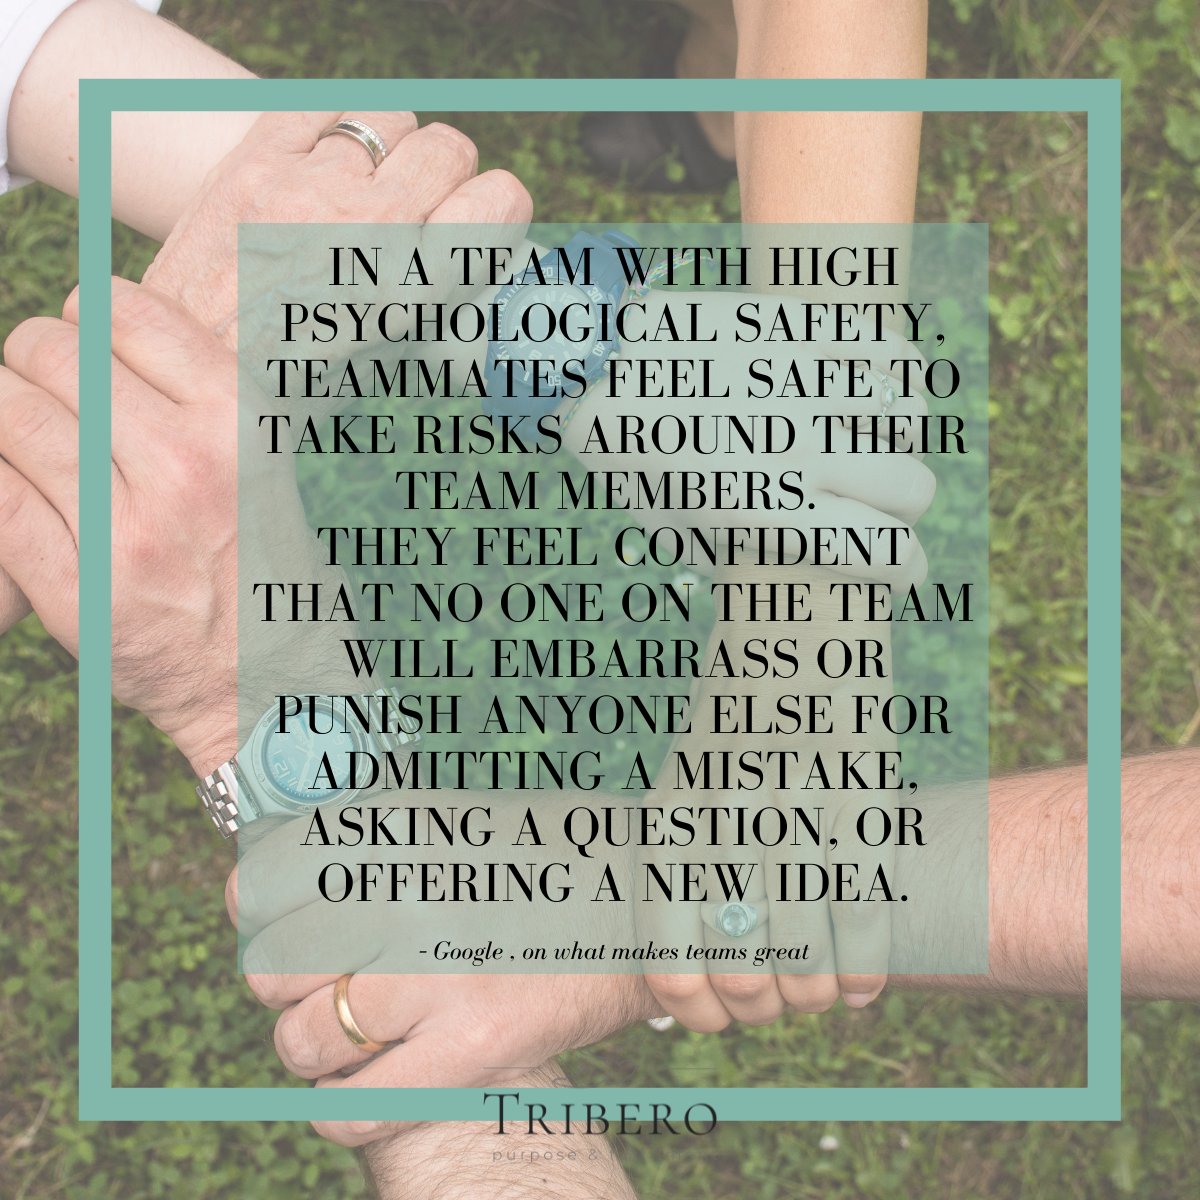 In a #team with high #psychologicalsafety, teammates feel safe to take risks around their team members. They feel confident that no one on the team will embarrass or punish anyone else for admitting a mistake, asking a question, or offering a new idea - Google
#trust